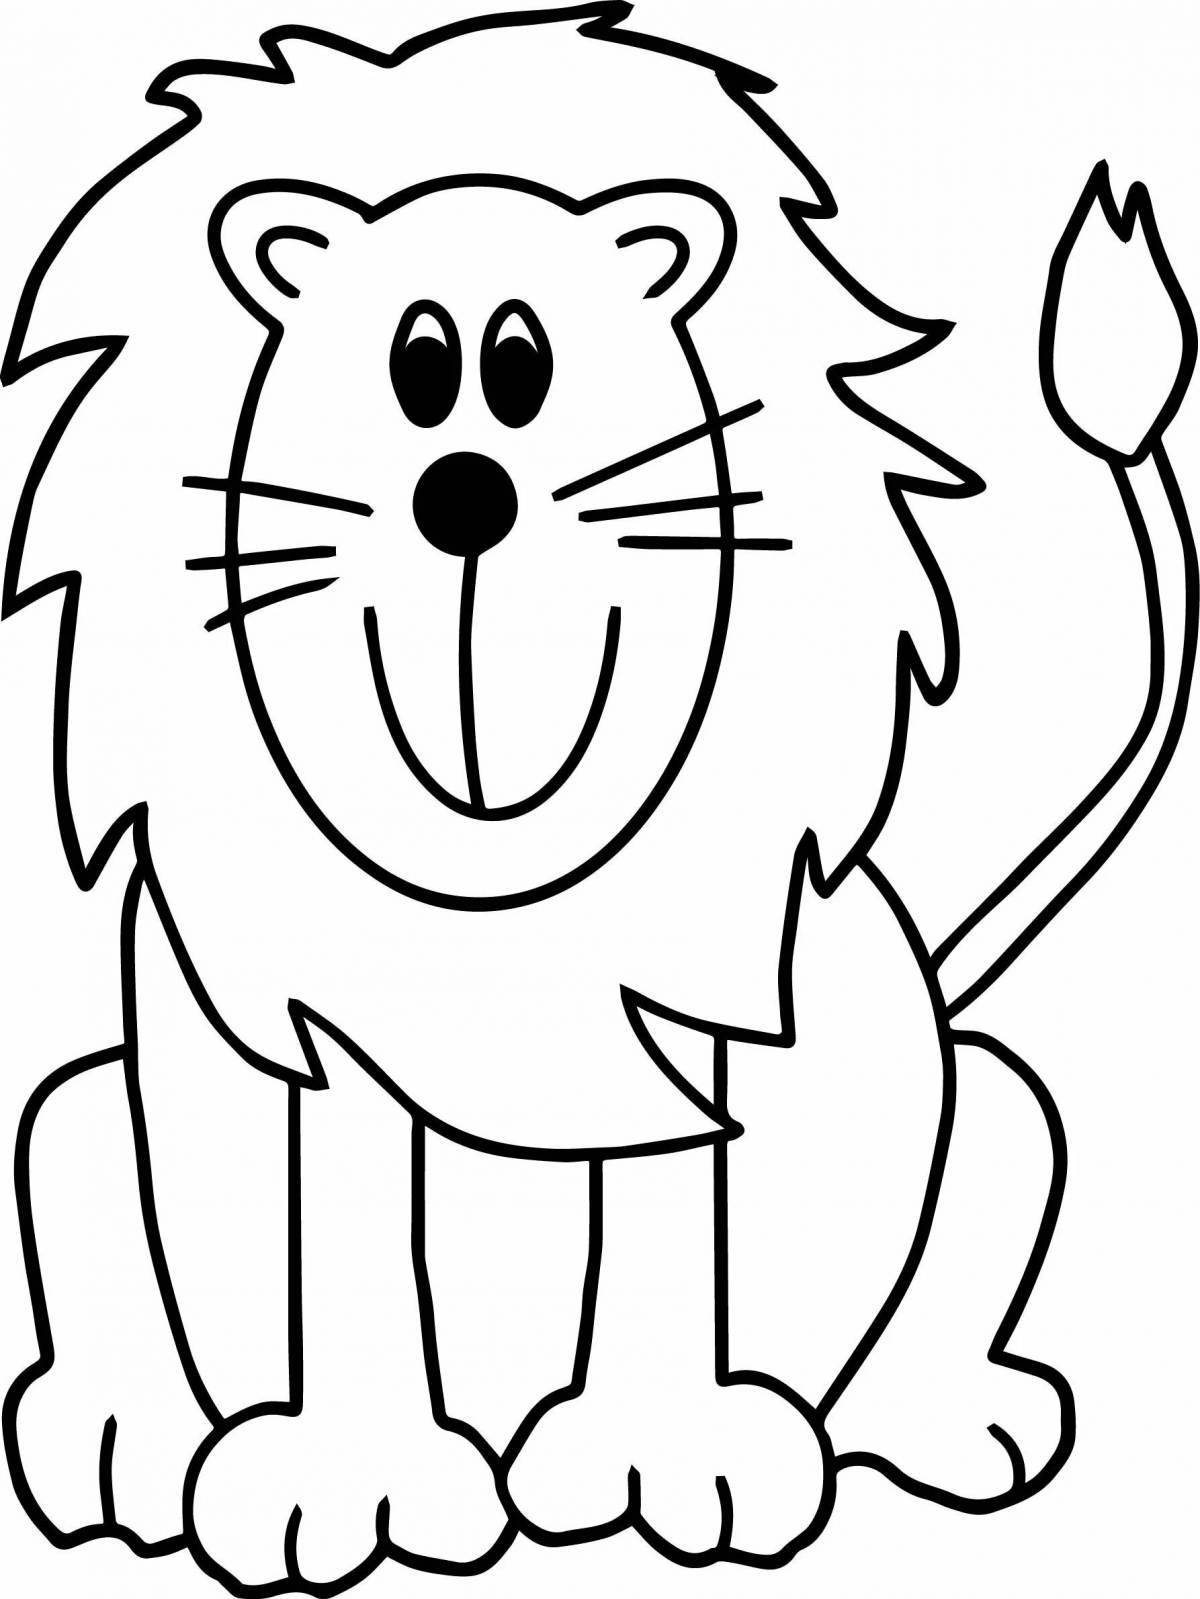 Live lion coloring book for kids